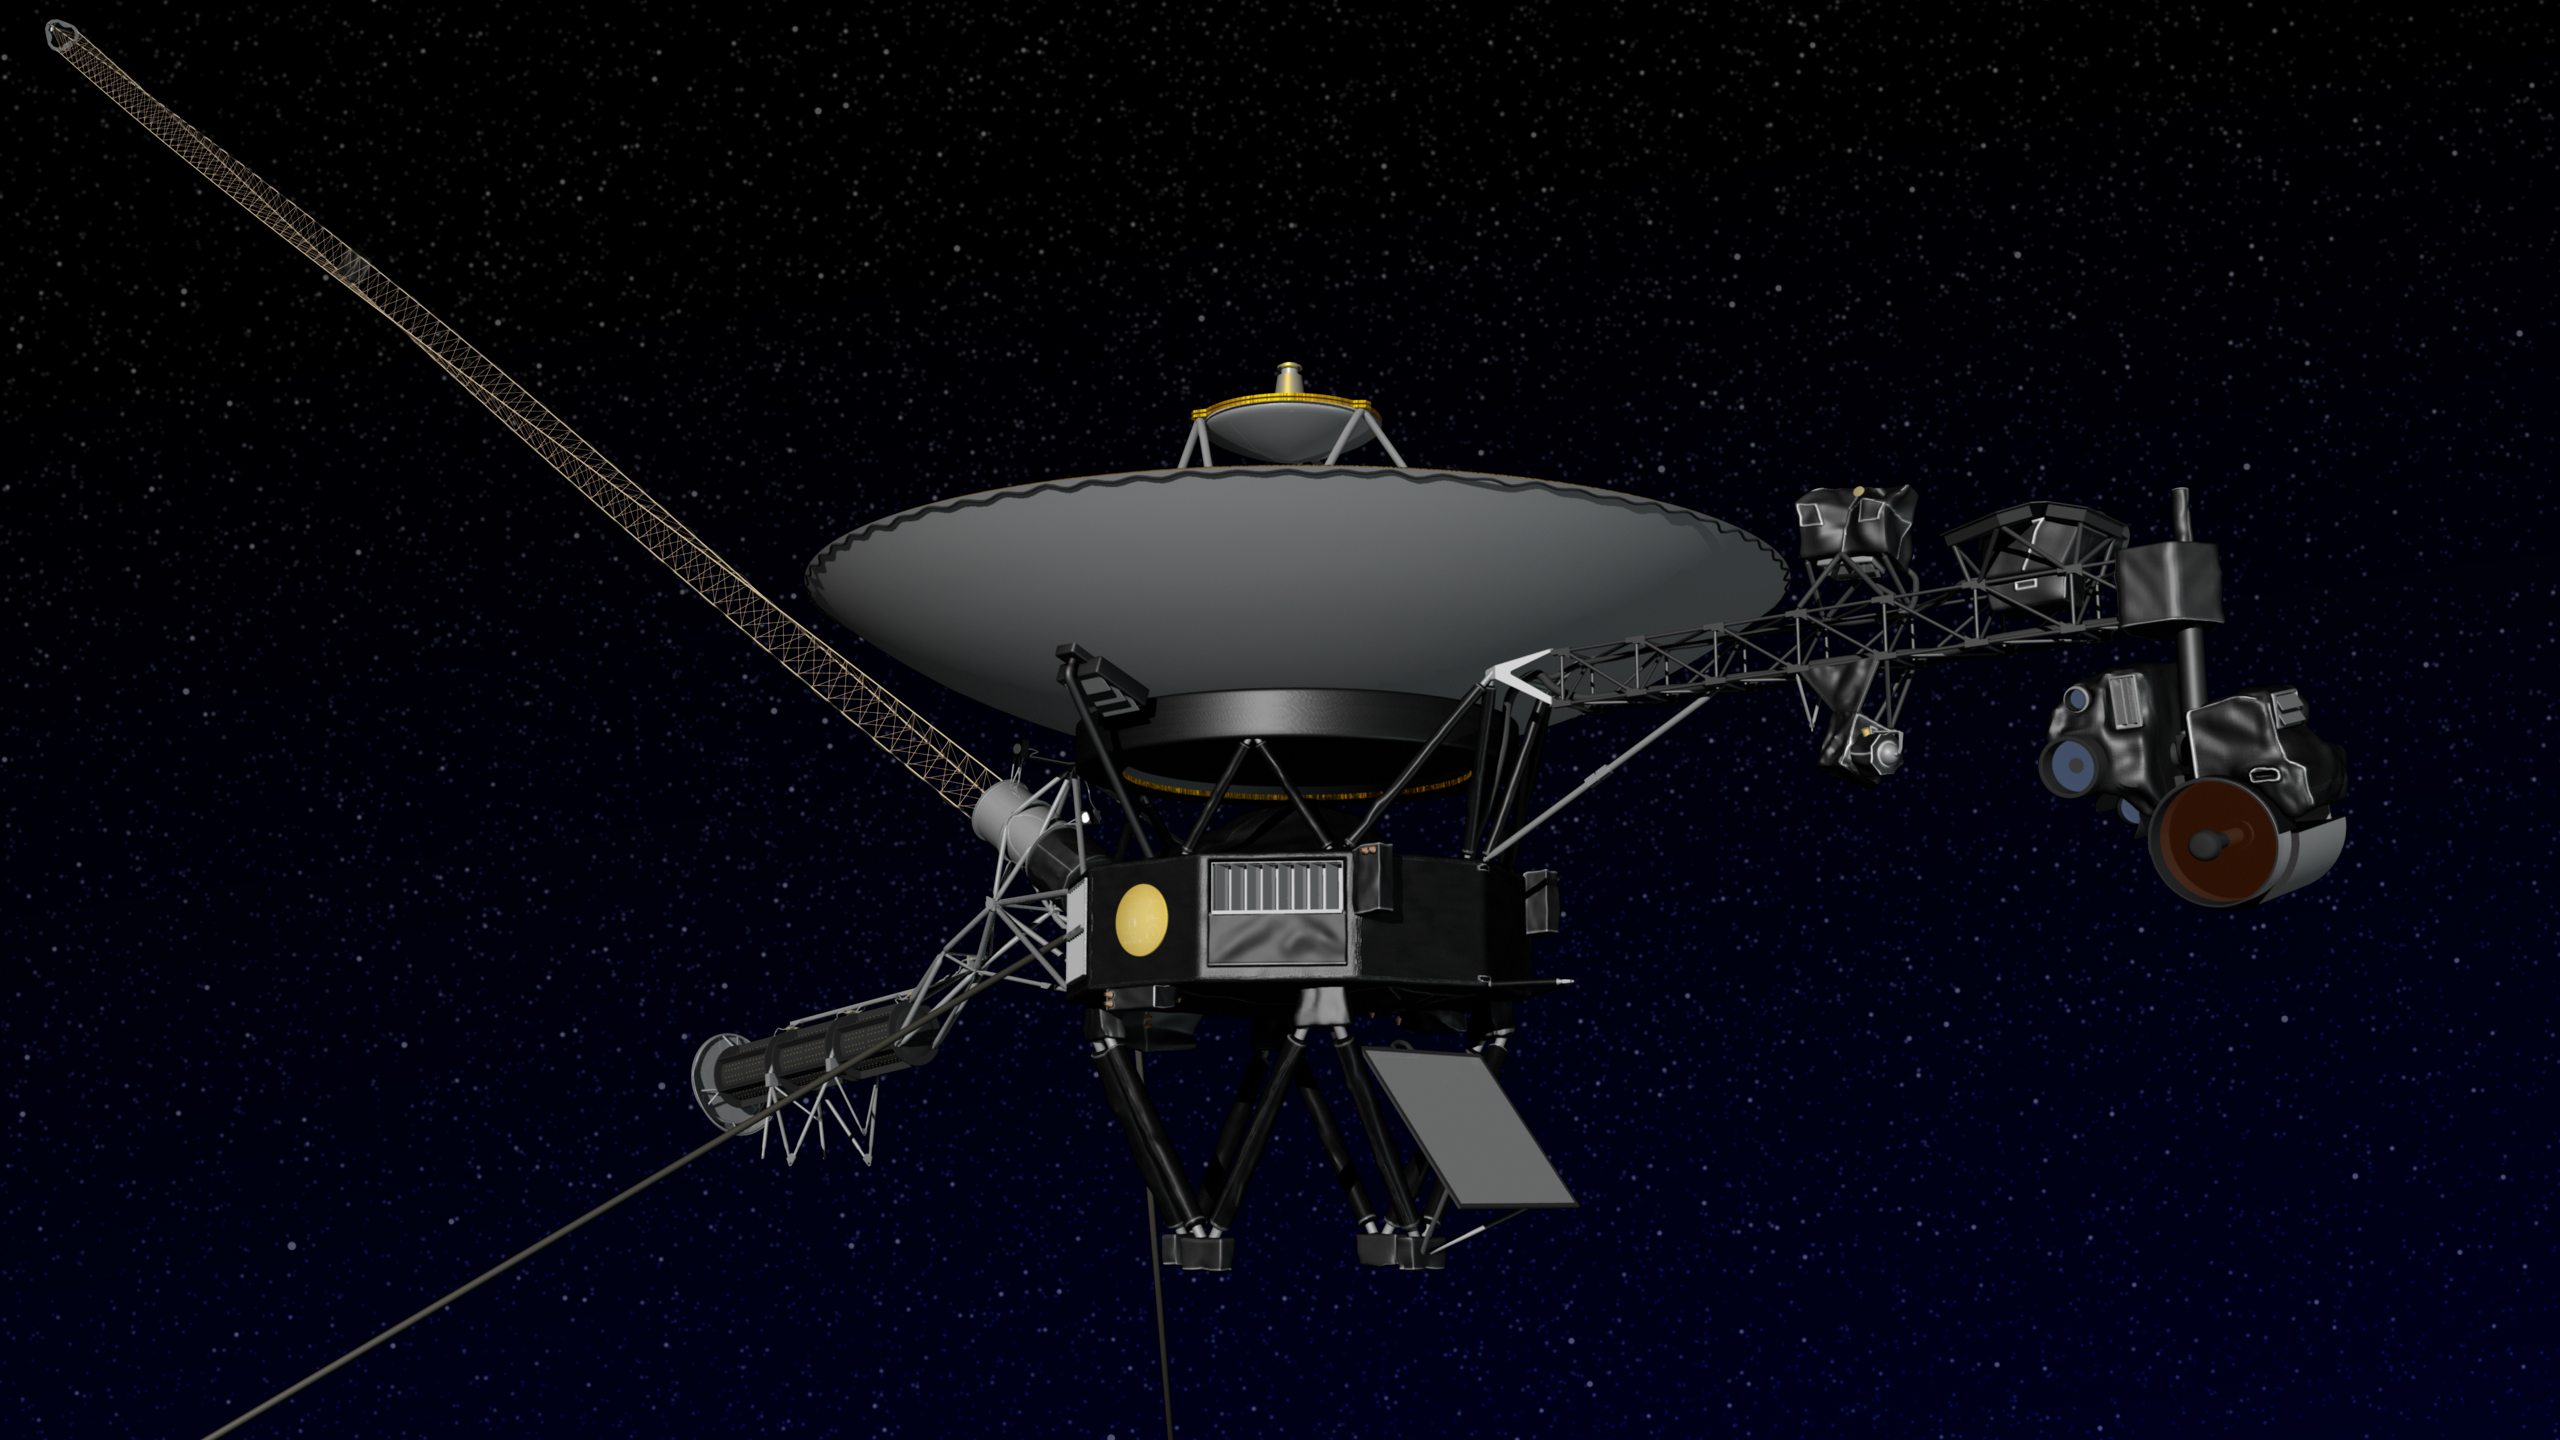 NASA image of Voyager spacecraft JPL spacecraft posted on AmericaSpace